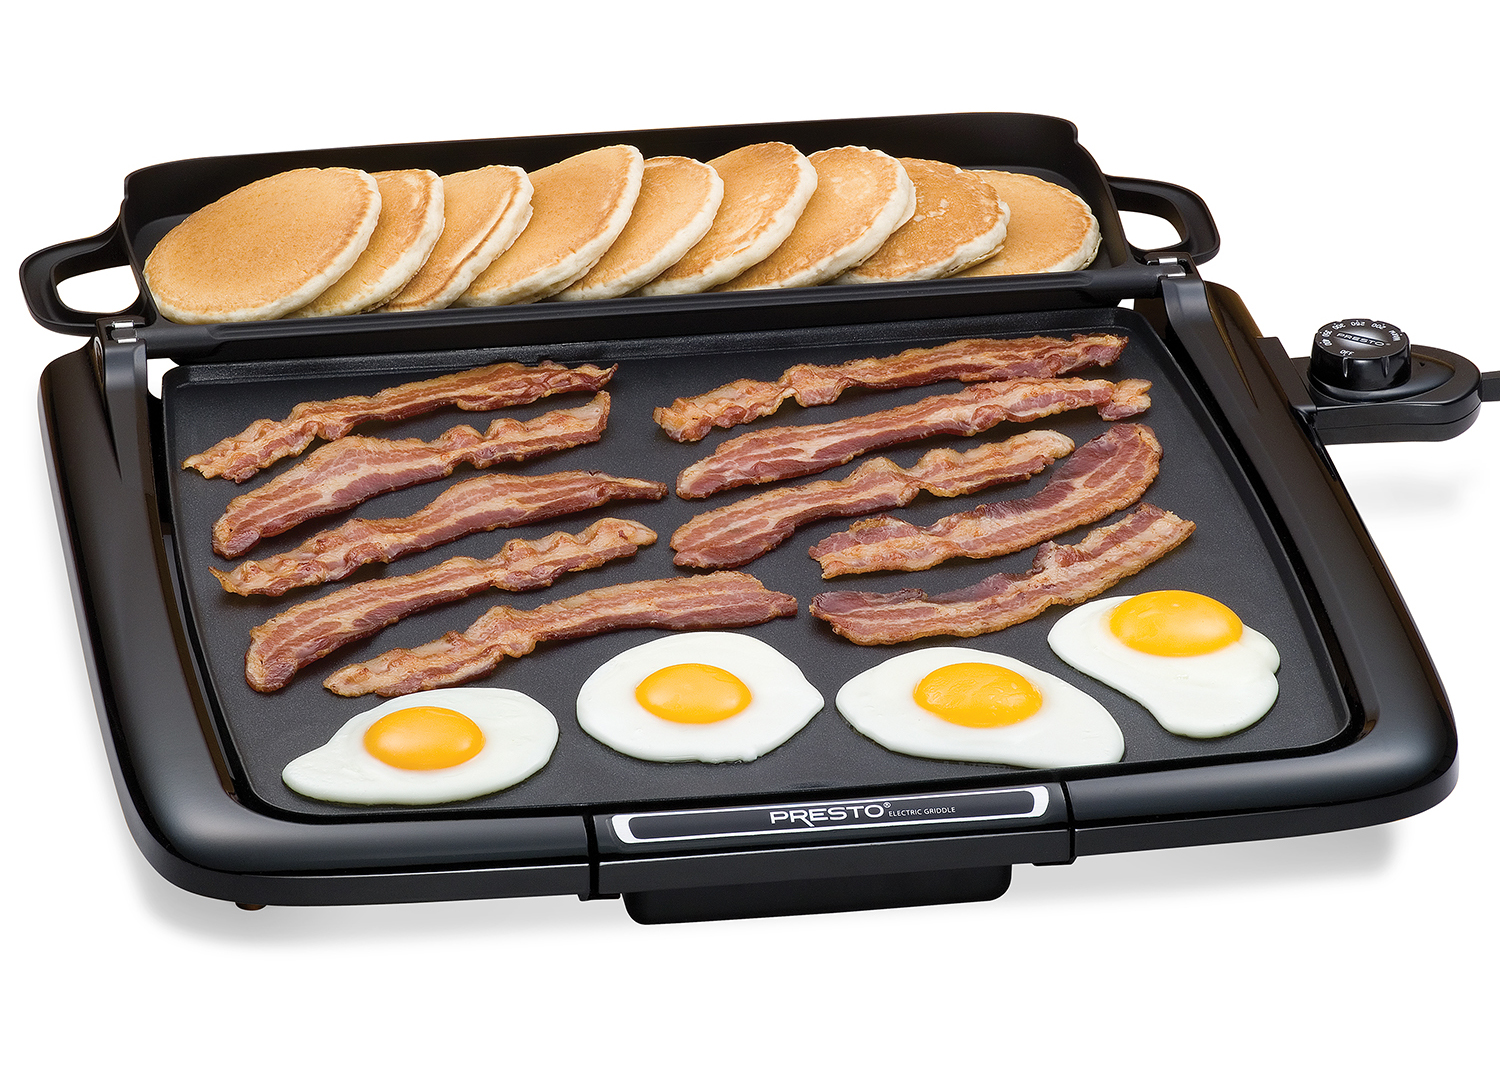  18 inch Nonstick Electric Griddle for 8 Pancakes or Eggs At  Once, with Warming Tray: Home & Kitchen